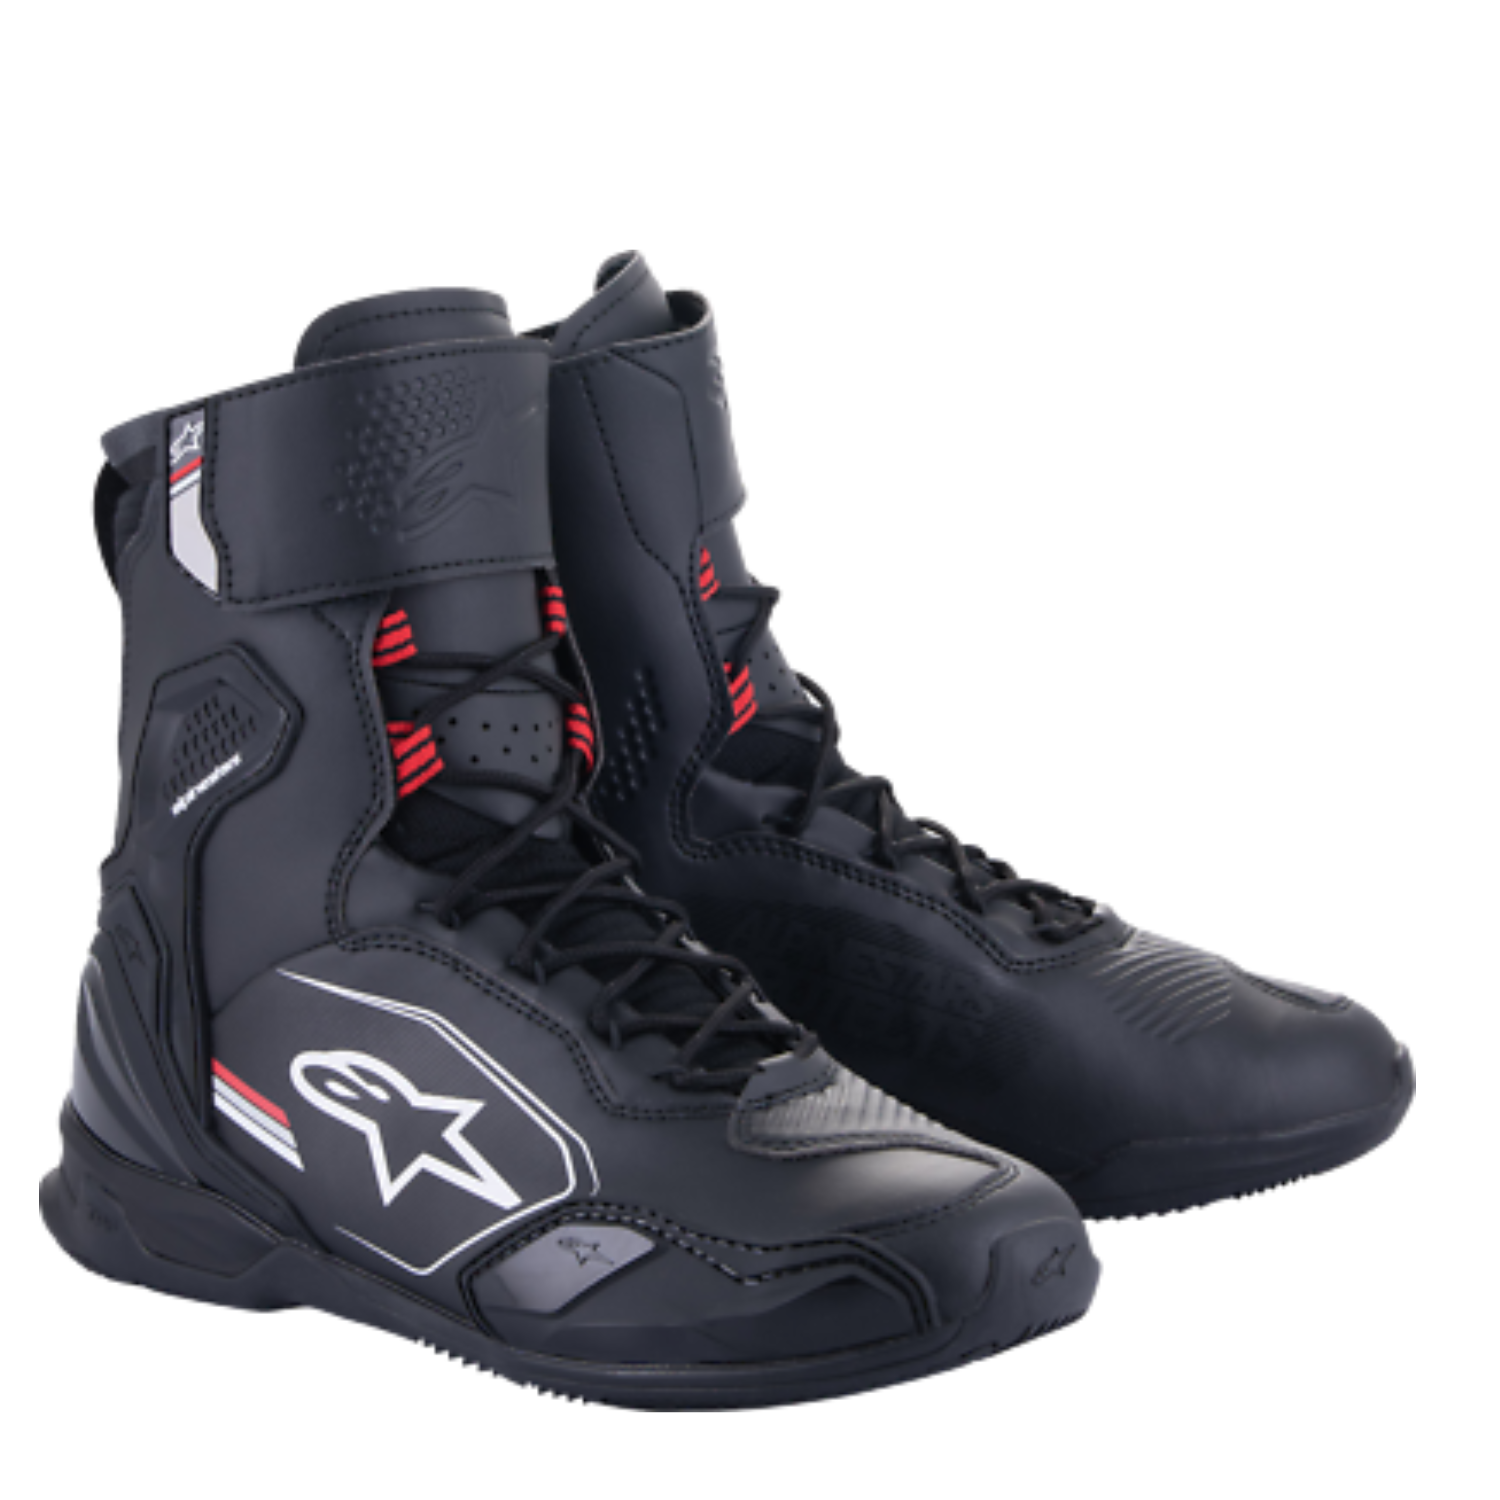 Image of Alpinestars Superfaster Shoes Black Gray Bright Red Size US 7 ID 8059347260761